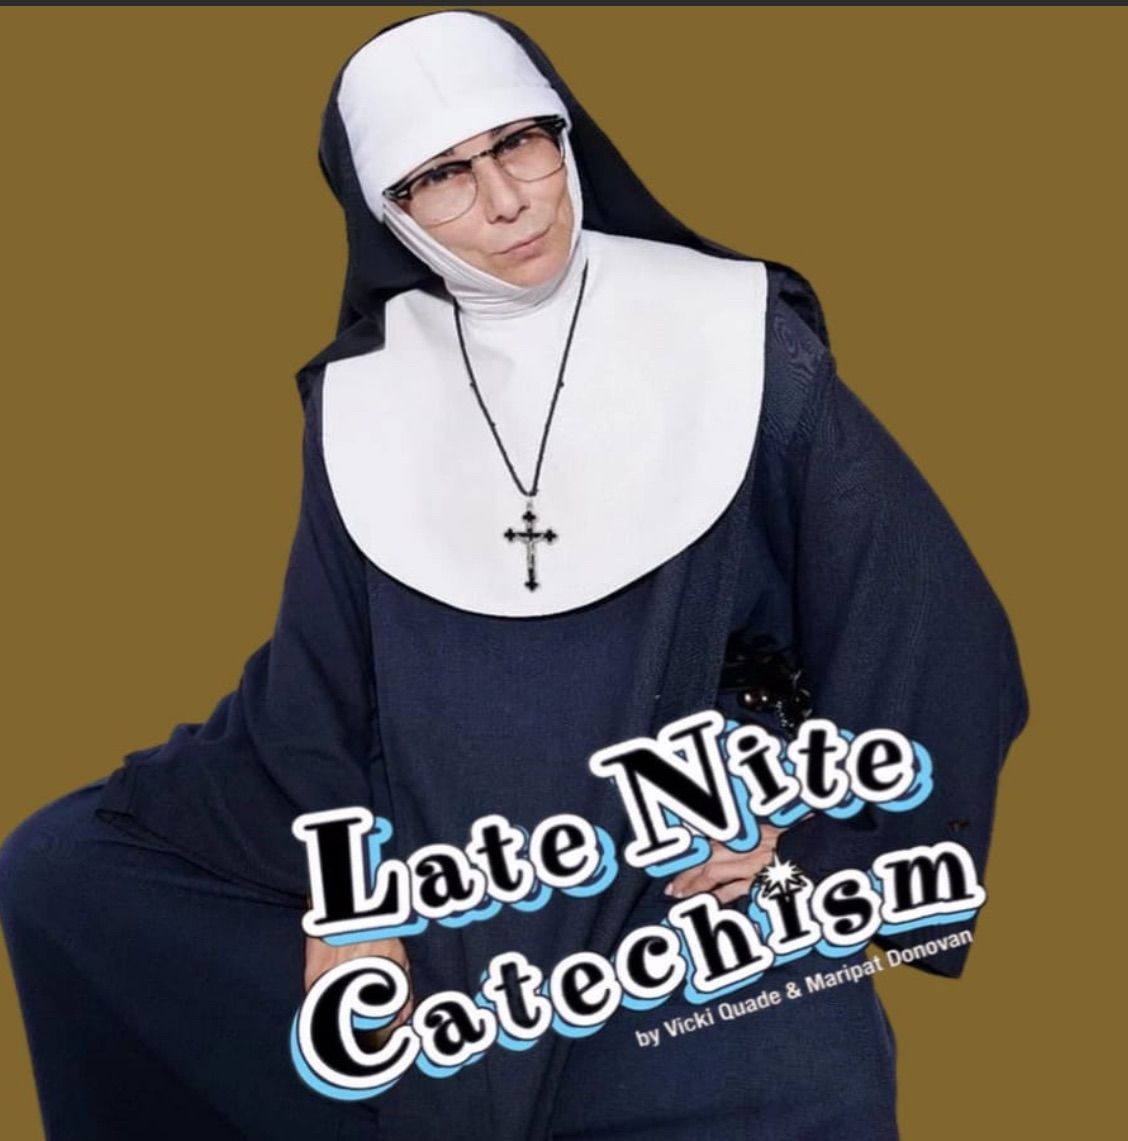 Late Nite Catechism 